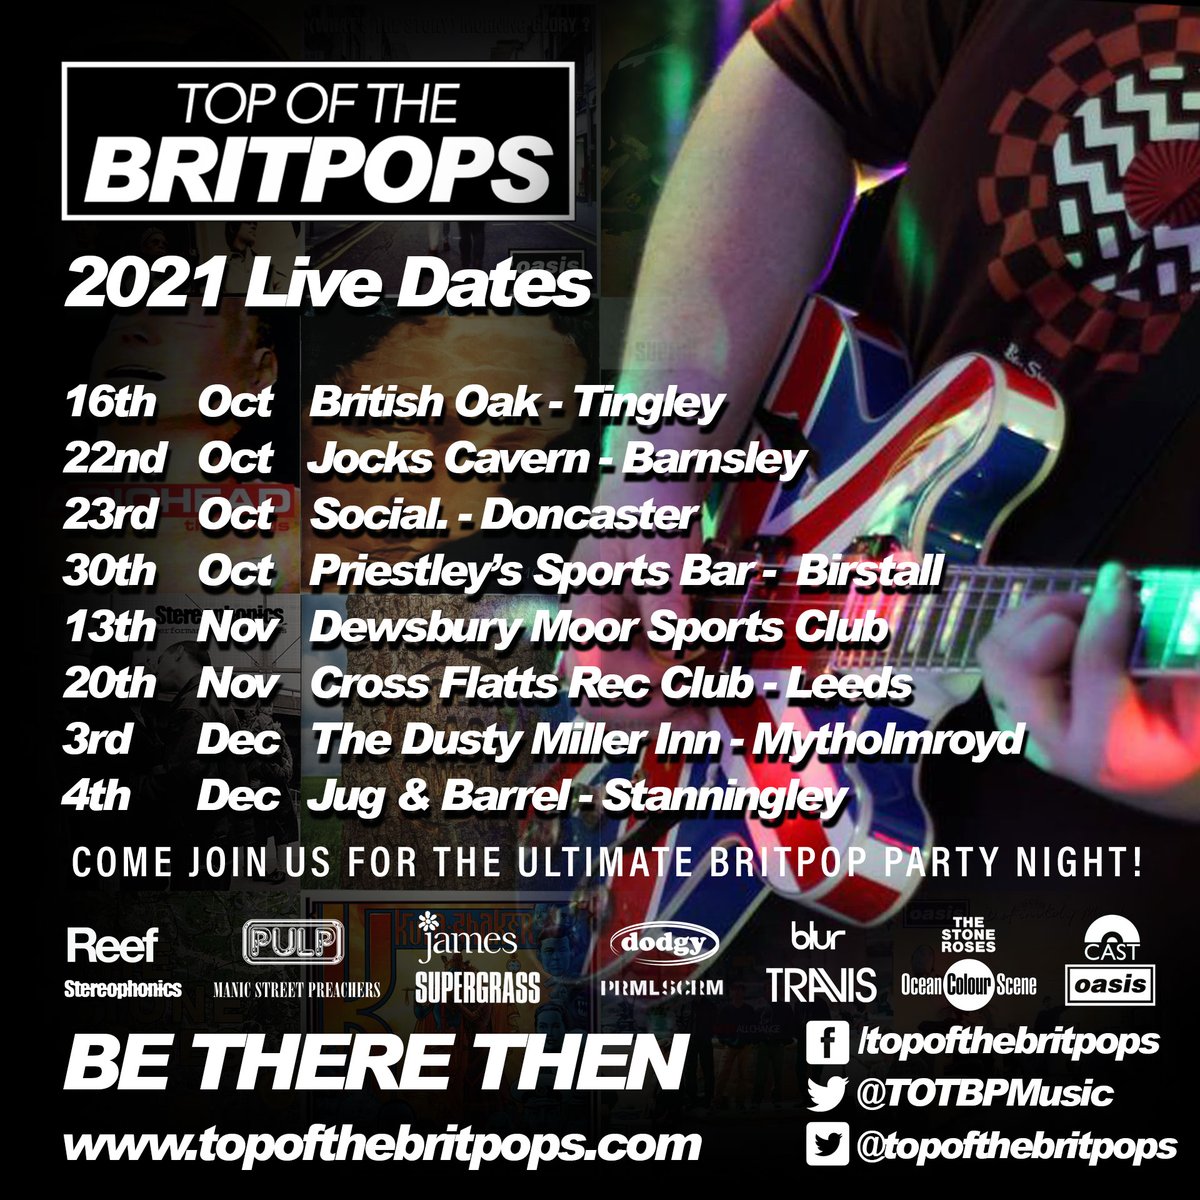 Gig List for 2021
Hope to see you all there!
#Gigs #LeedsGigs #DoncasterGigs #BarnsleyGigs #whatsonLeeds #WhatsonDoncaster #WhatsonBarnsley #LiveMusic #Britpop #Indie #NightsOut